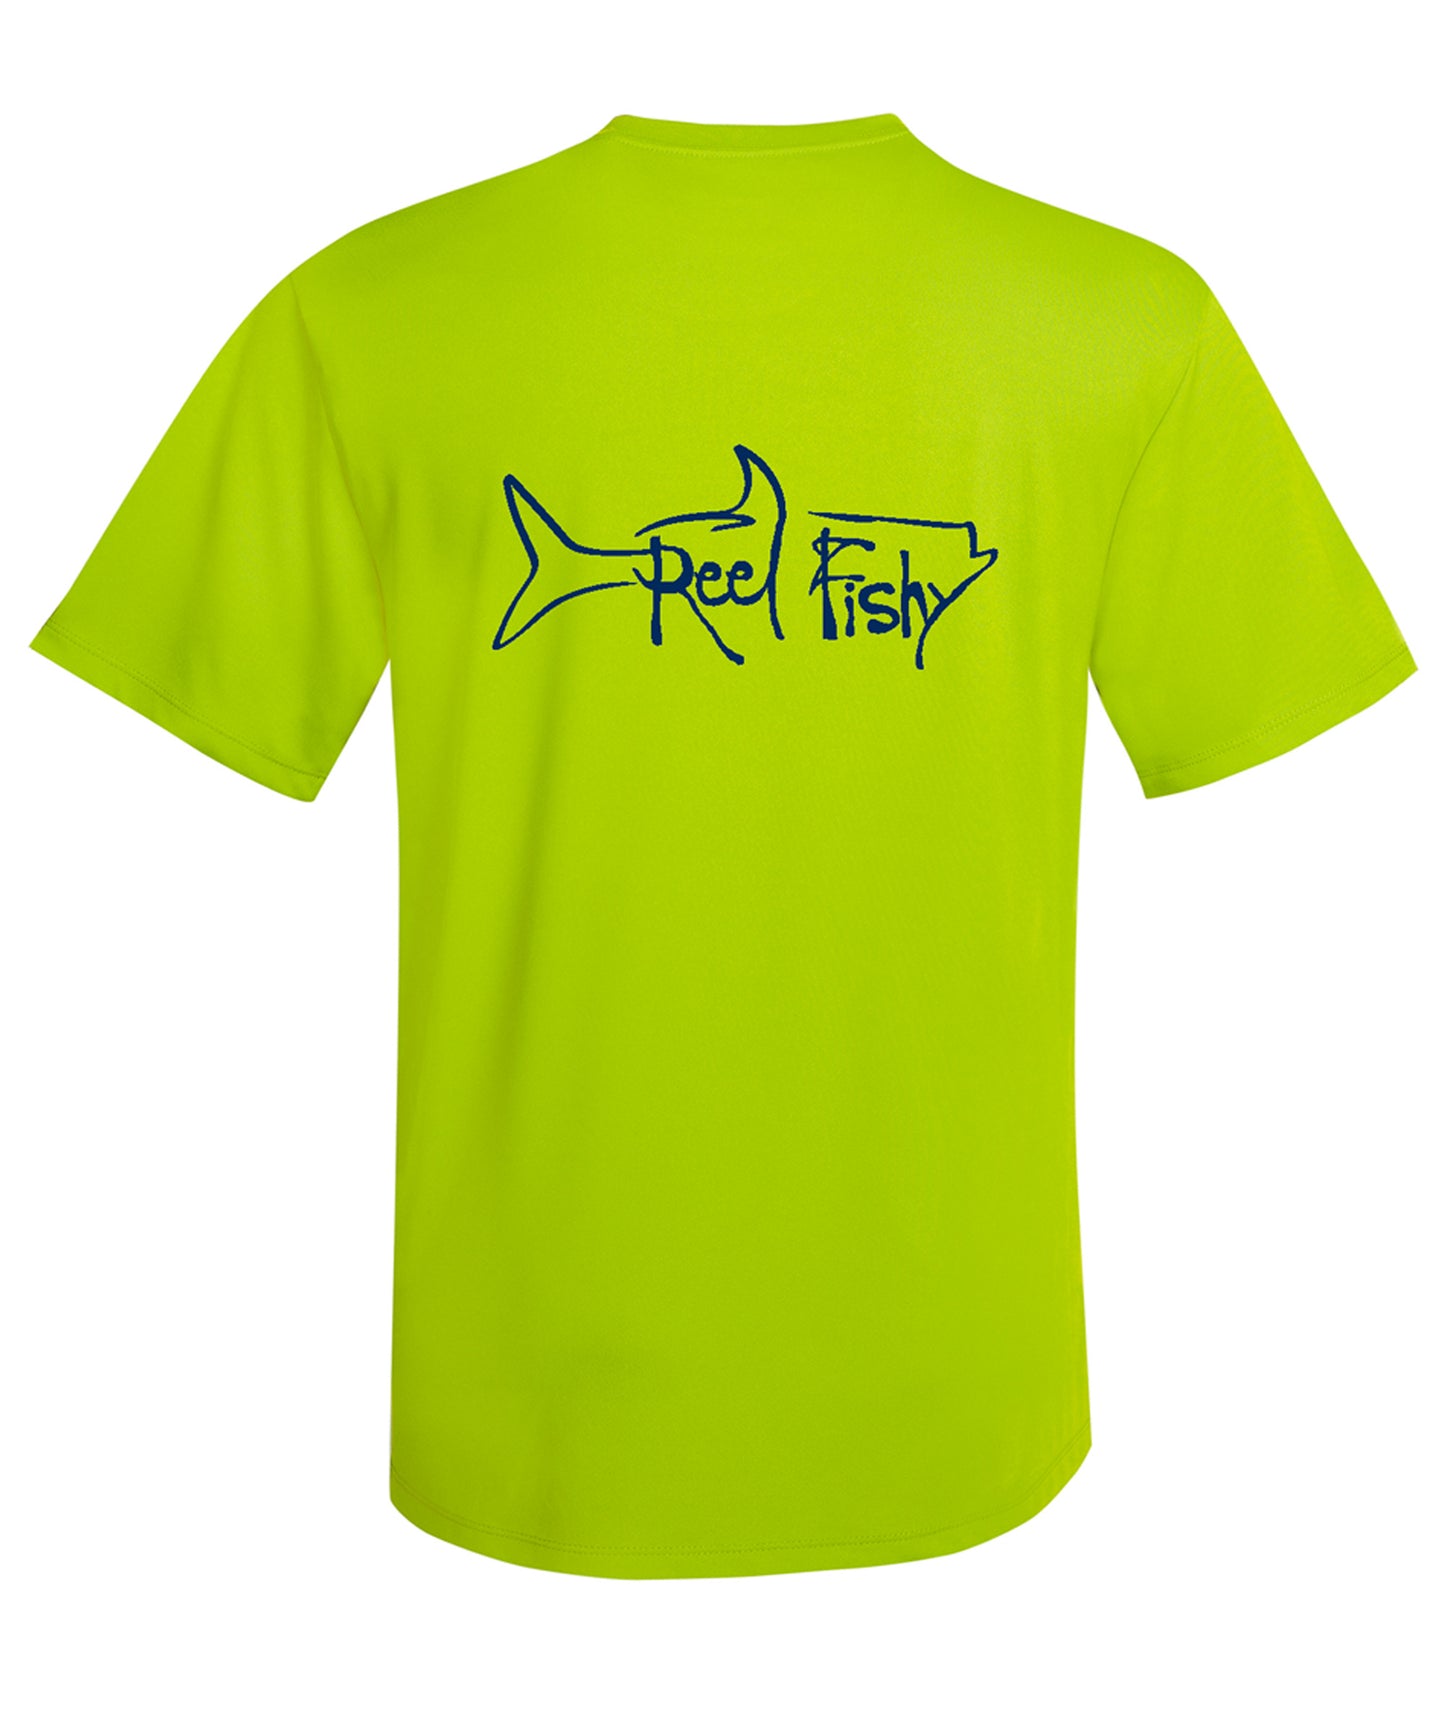 Performance Dry-Fit Tarpon Fishing Short Sleeve Shirts with Sun Protection in Neon Green